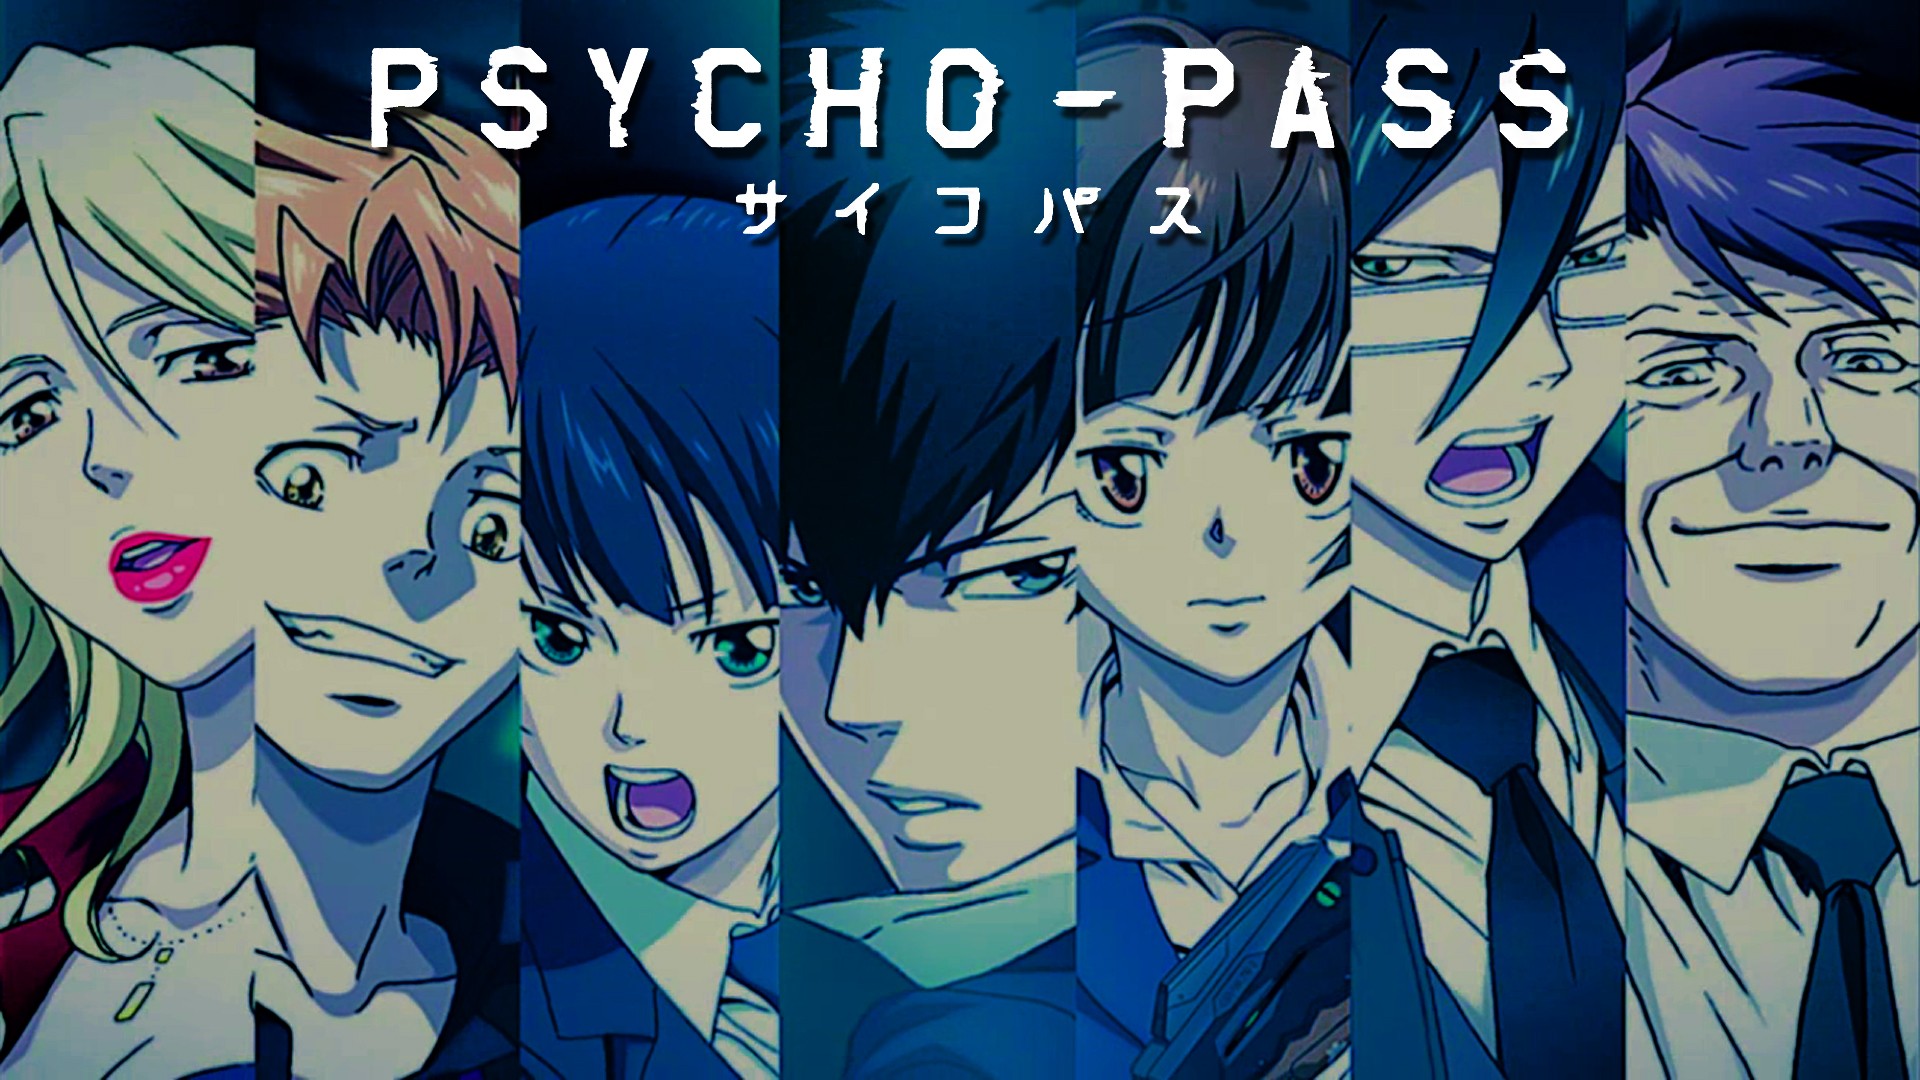 I Do Not Own The Picture Psycho Pass Wallpaper 1080p 1920x1080 Wallpaper Teahub Io